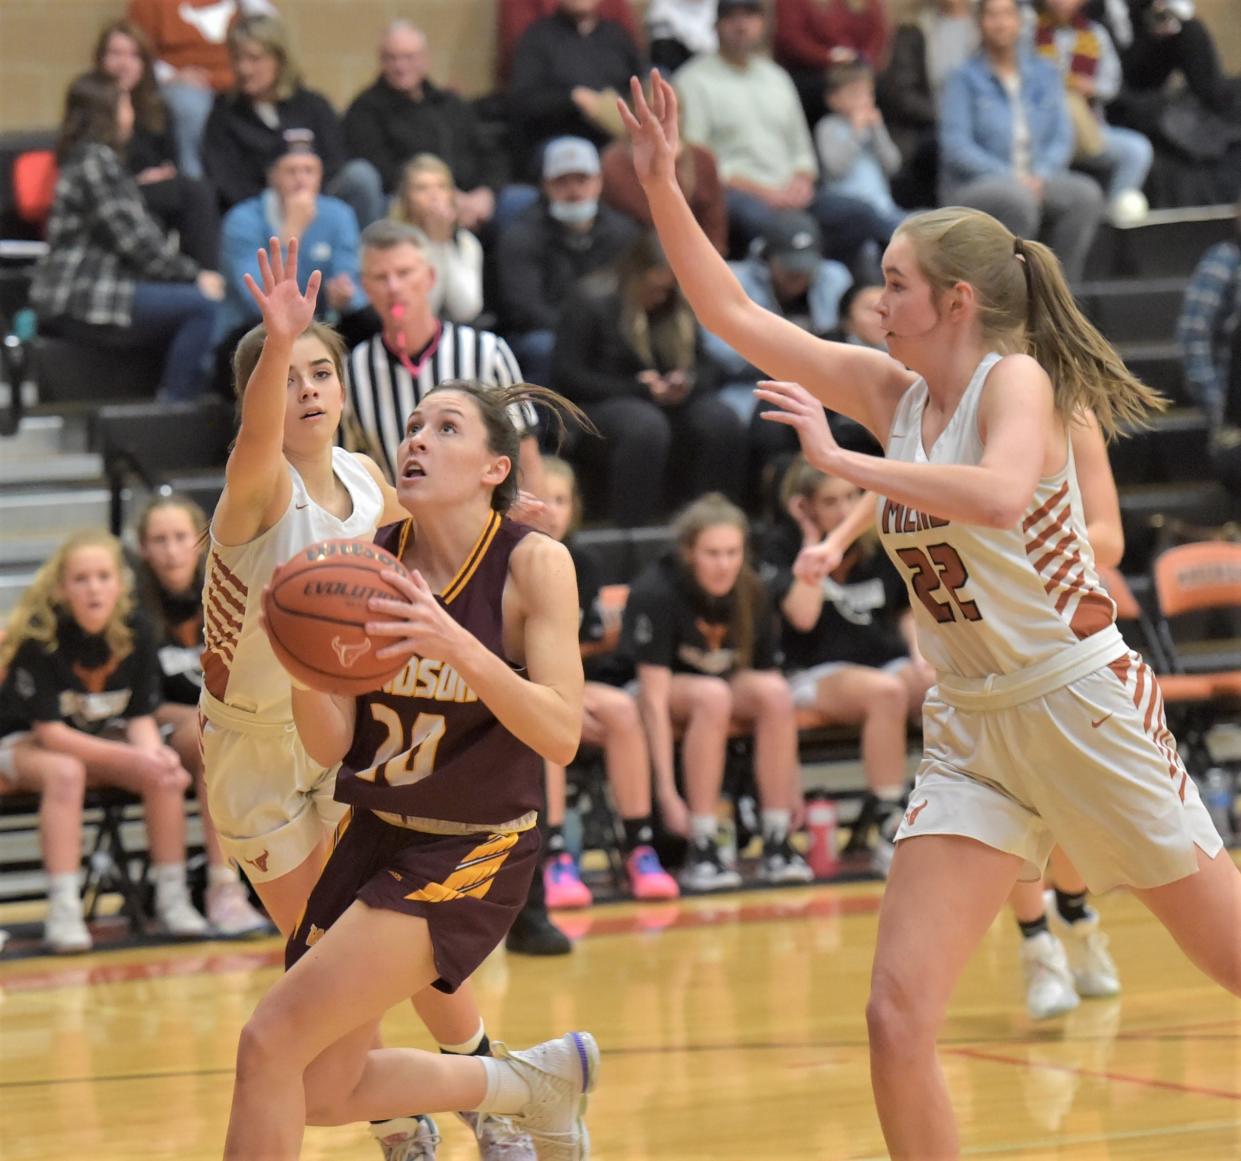 Windsor High School girls basketball player Mykaela Moore puts up shot during a 58-46 win at Mead on Friday, Jan. 28, 2022, in Longmont, Colo.